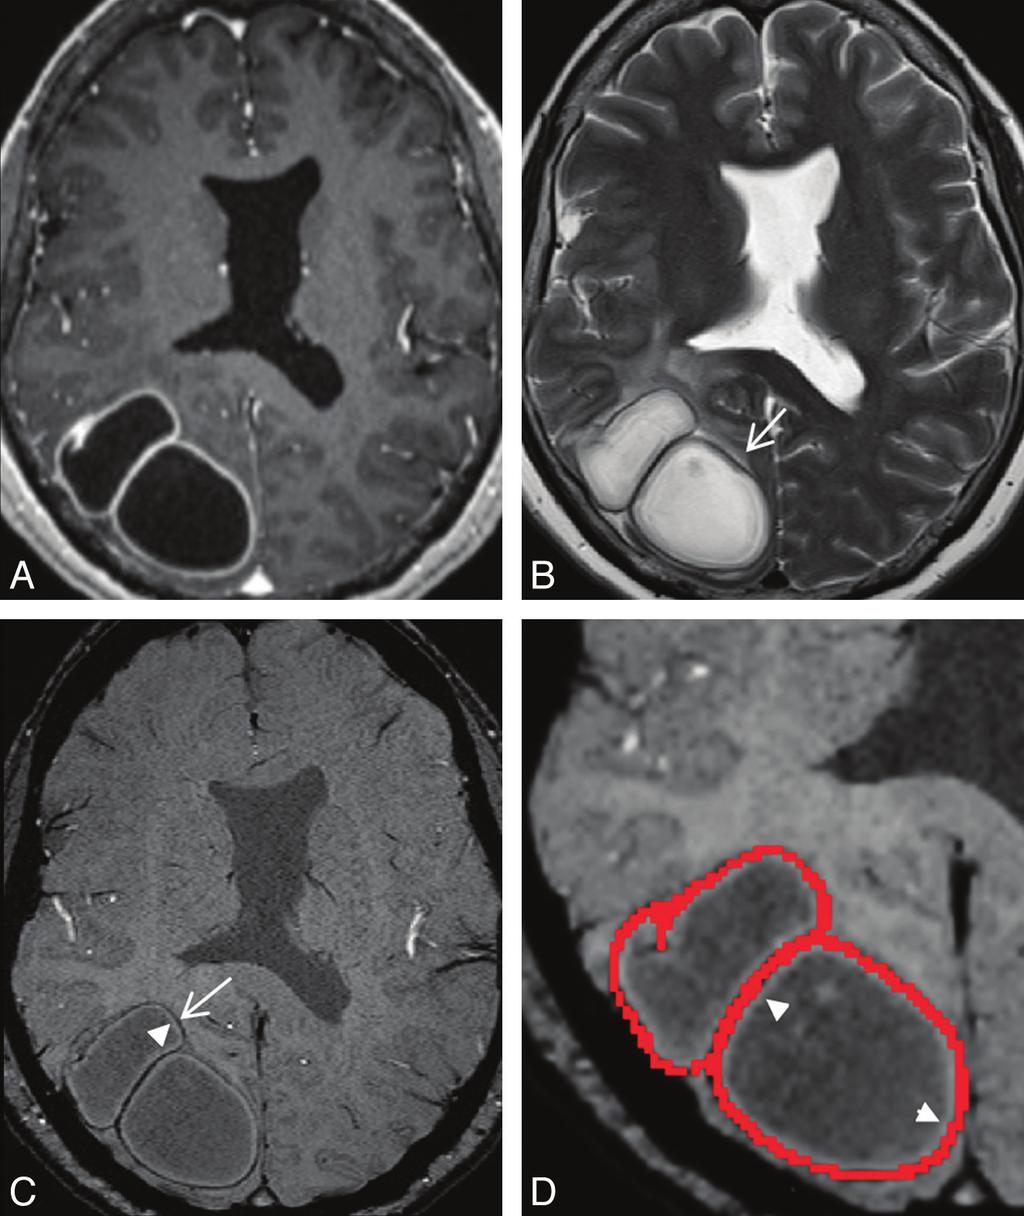 Fig 1. A 56-year-old woman with 2 right occipital pyogenic brain abscesses. A, Transverse contrast-enhanced MPRAGE shows 2 adjoining rim-enhancing masses in the right occipital lobe.